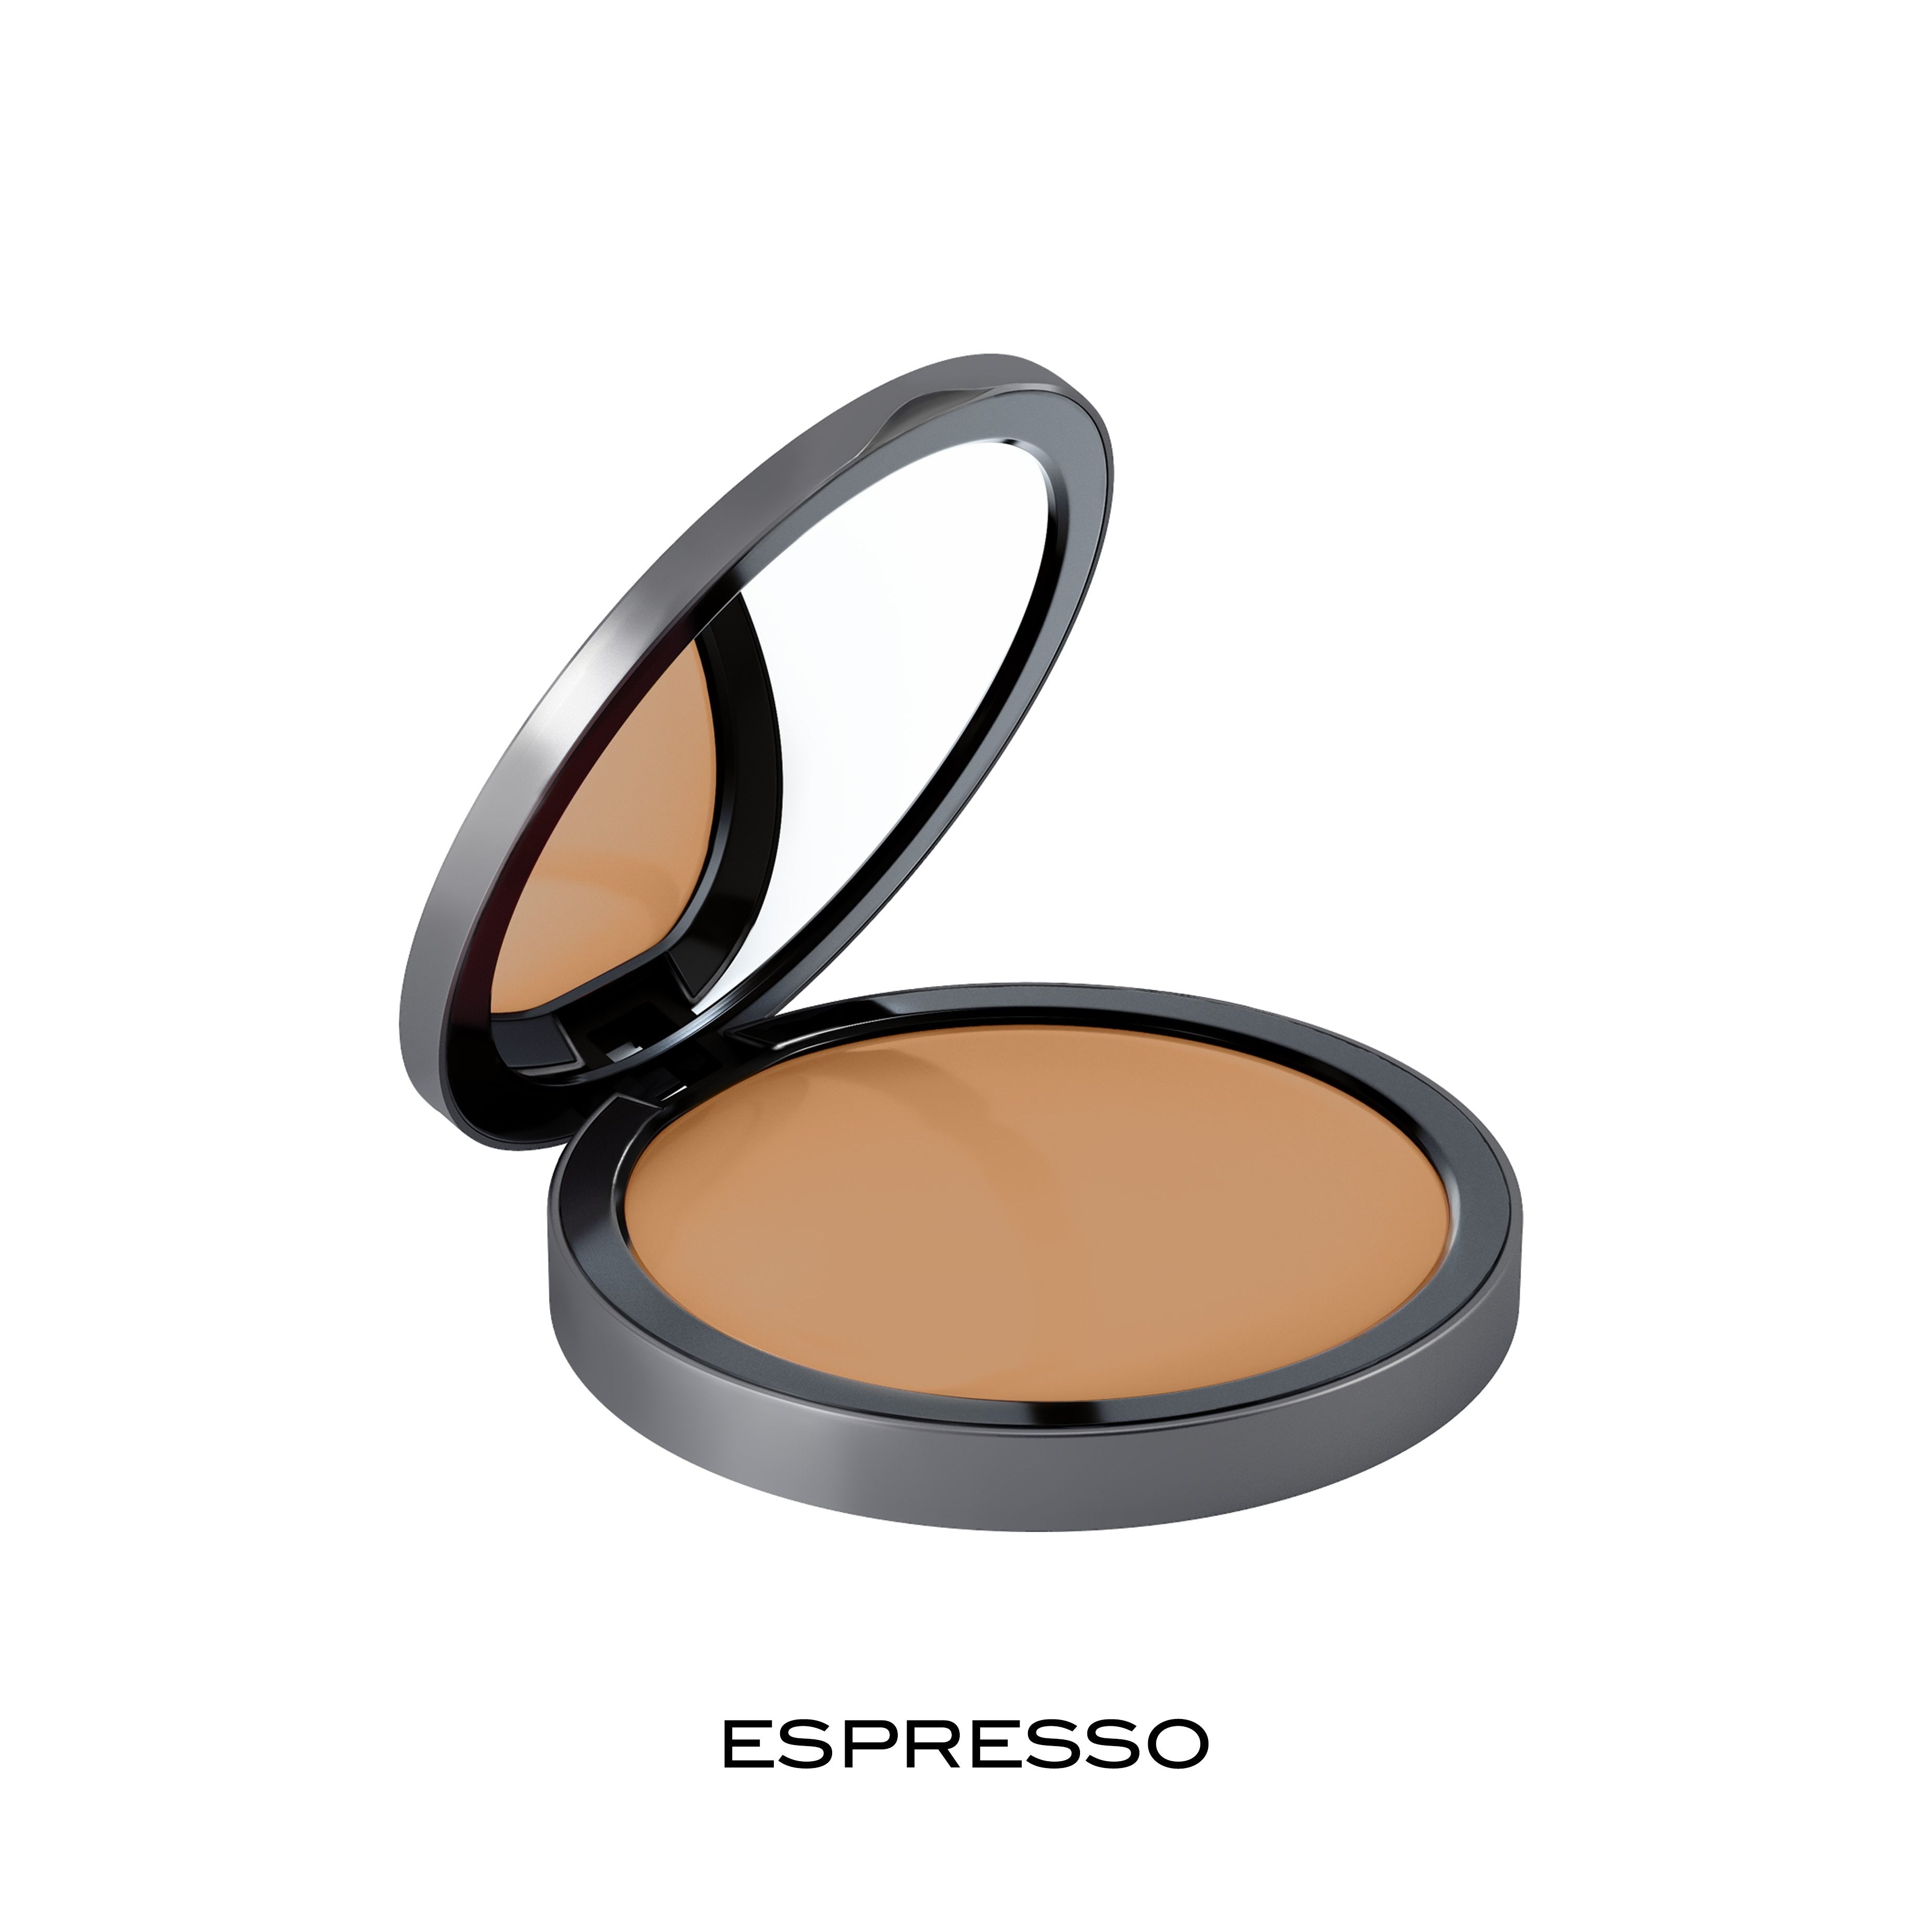 Synergie Skin Mineral Whip Foundation in Espresso | skintoheart